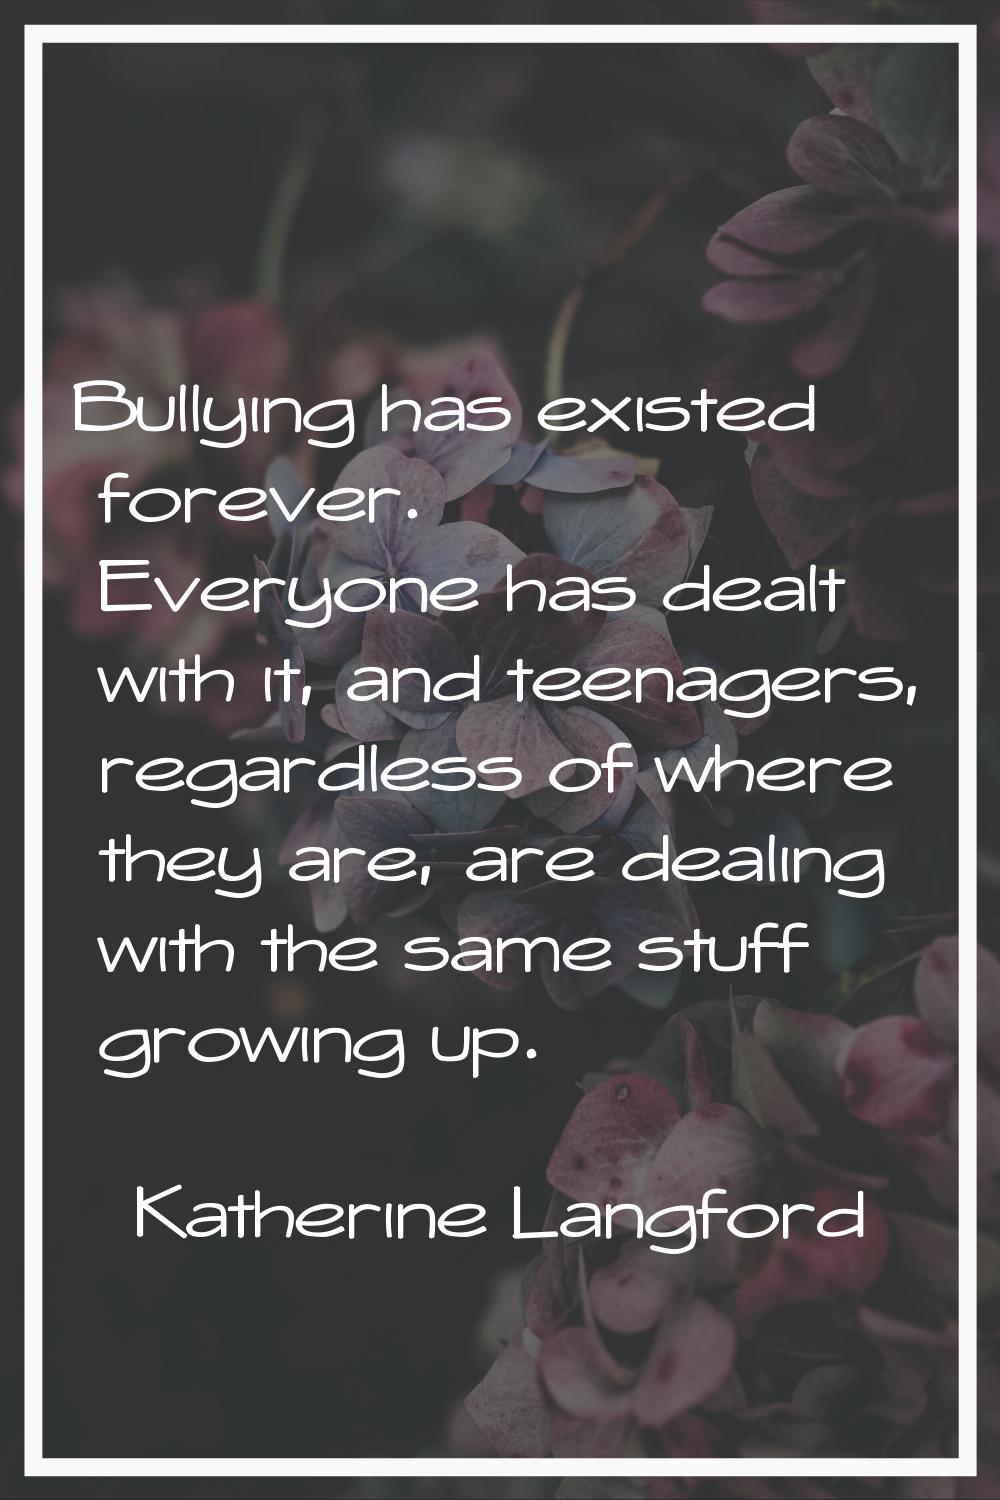 Bullying has existed forever. Everyone has dealt with it, and teenagers, regardless of where they a